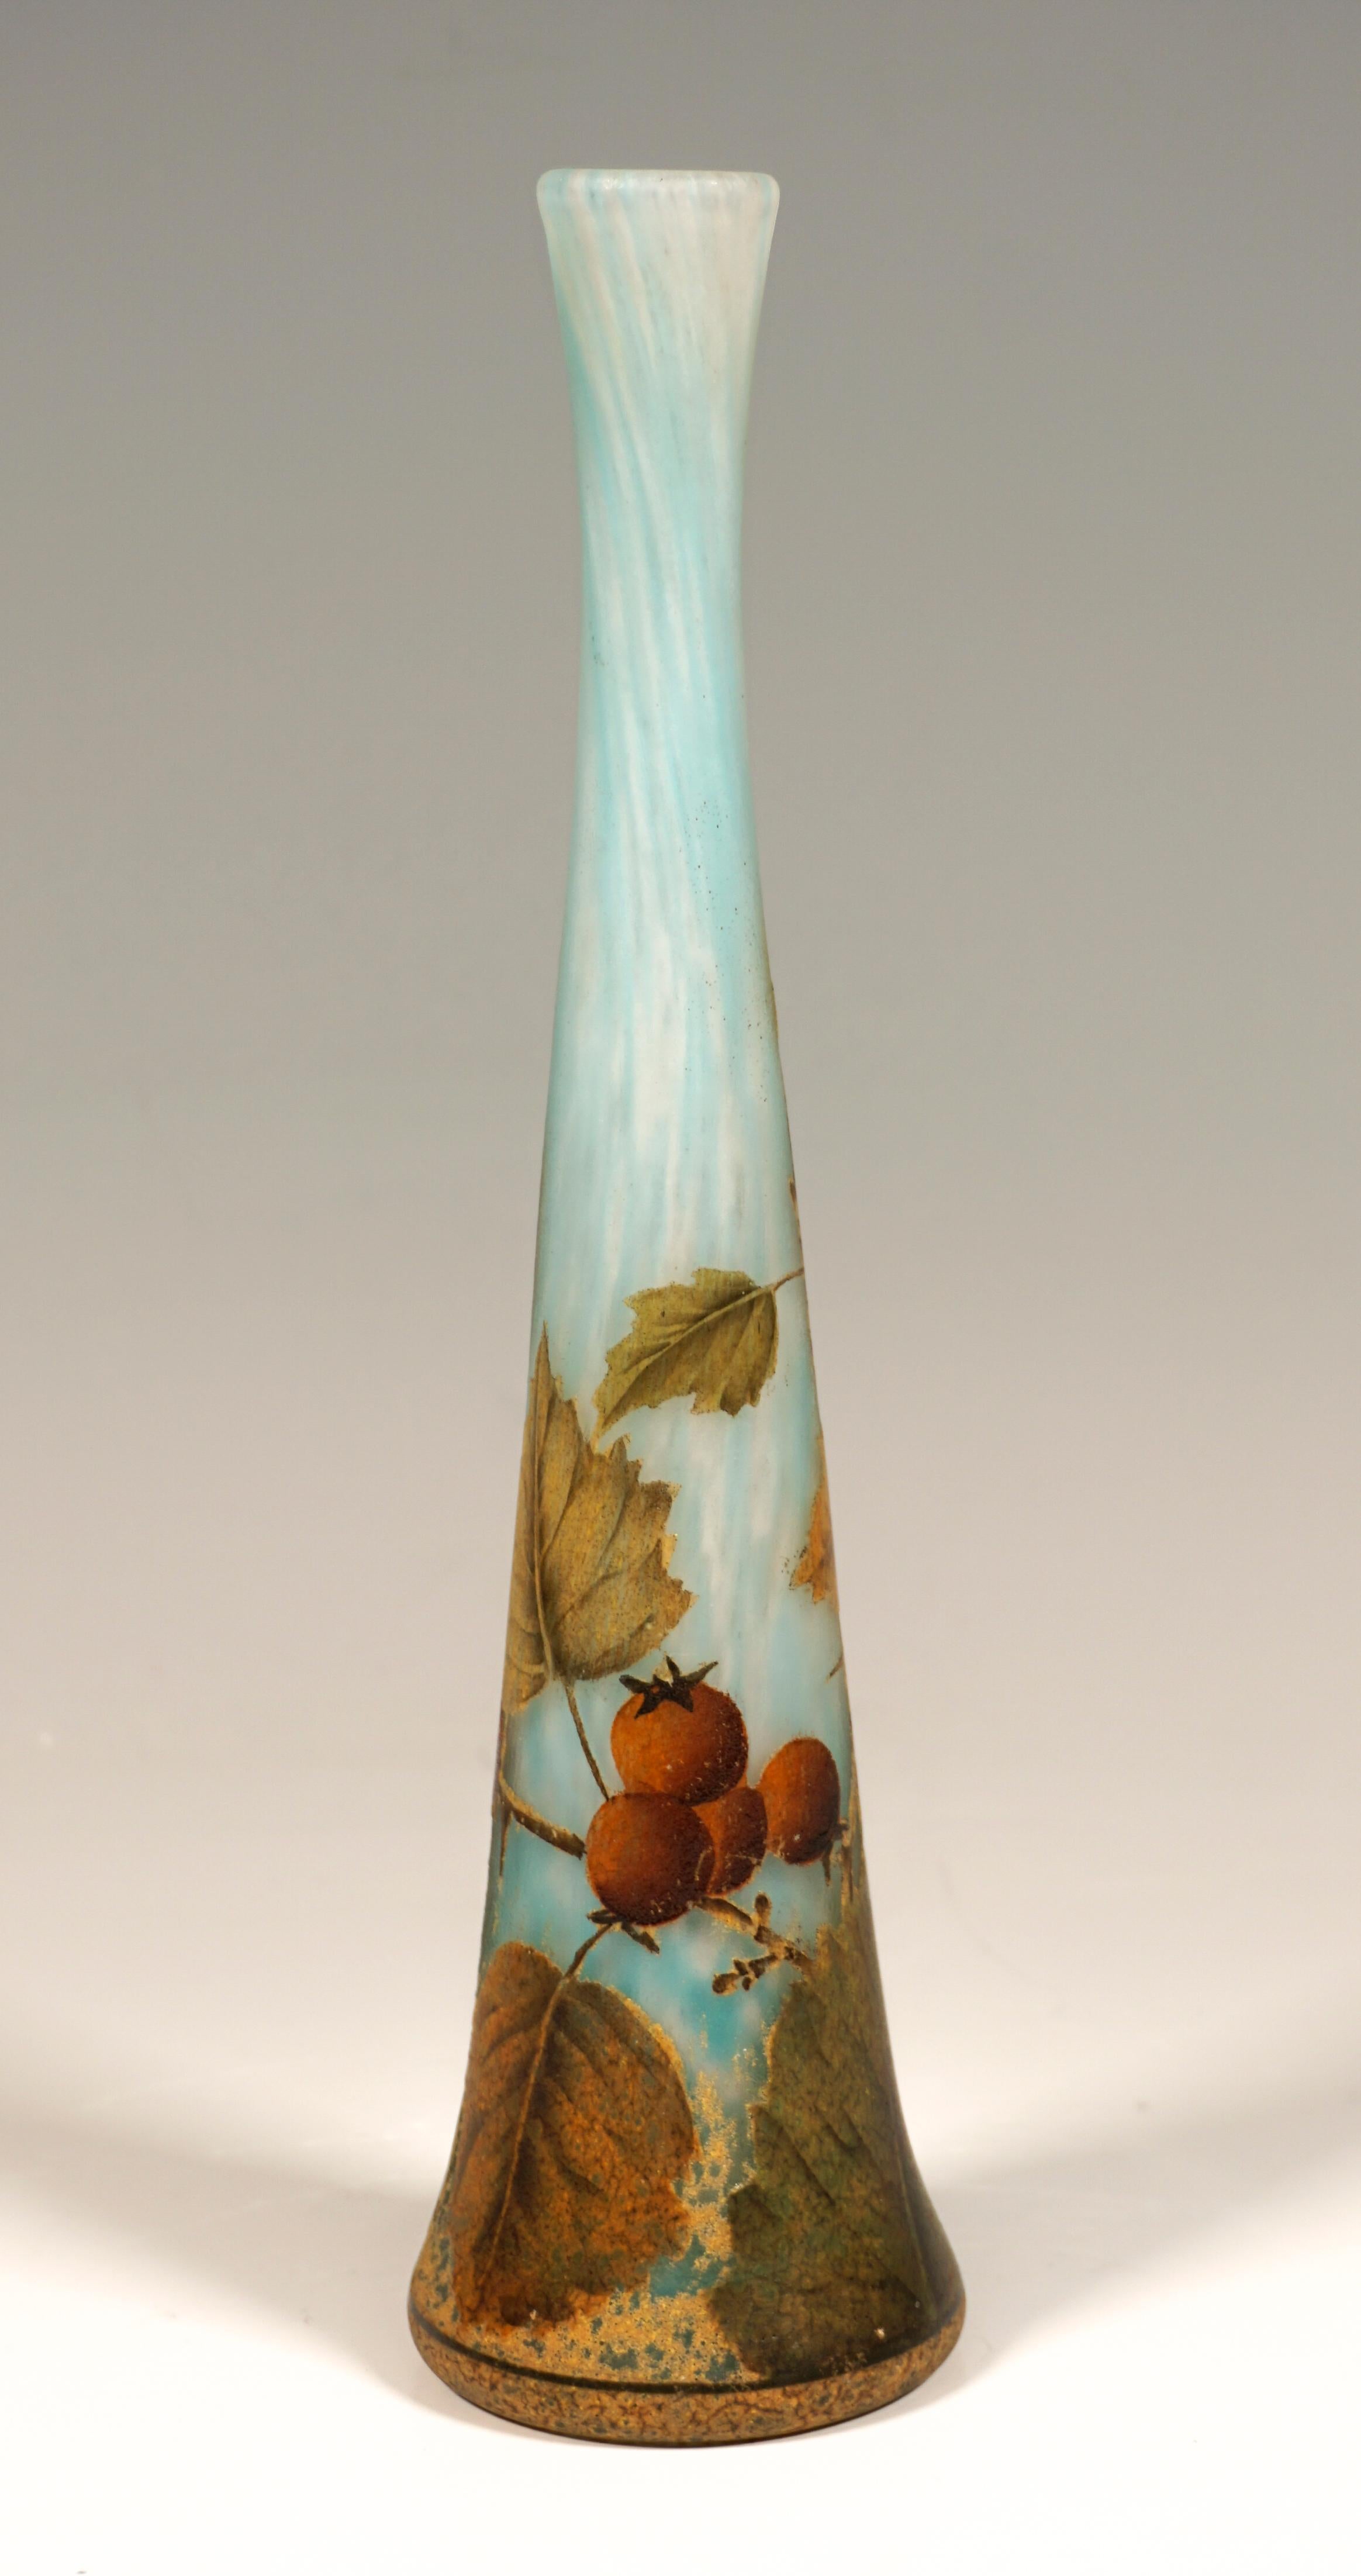 Solitaire vase with a flush round stand, wall tapering in a conical, slender form towards the top and then opening again slightly, colorless glass with flaky white and light blue powdered color inclusions running in warped, vertical lines, with